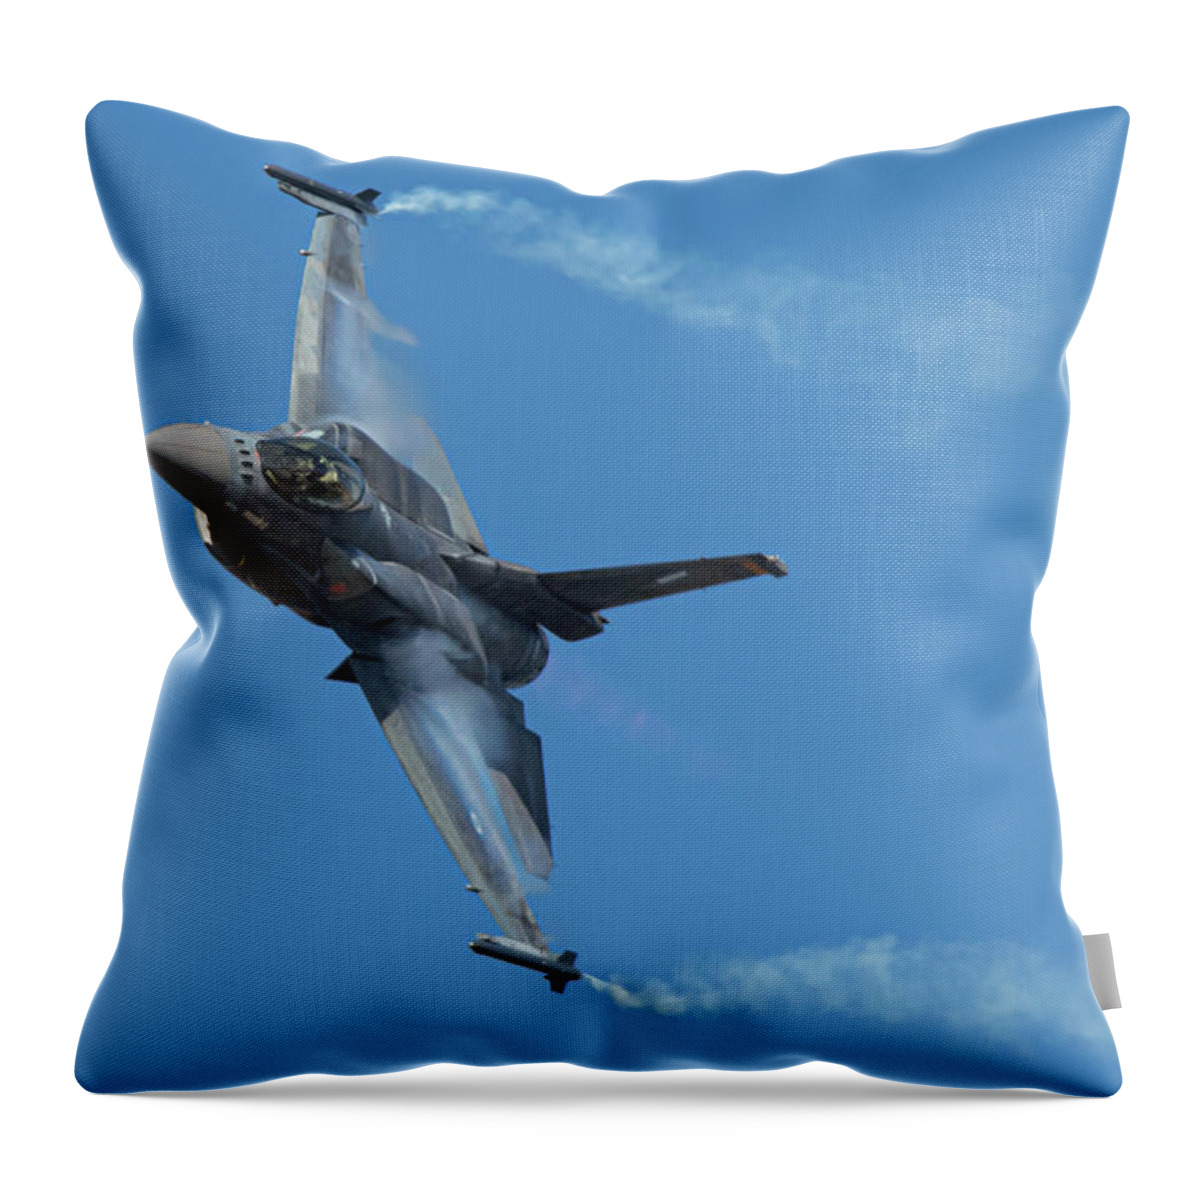 Zeus Demo Team Throw Pillow featuring the photograph F-16 Fighting Falcon Zeus Demo Team by Airpower Art